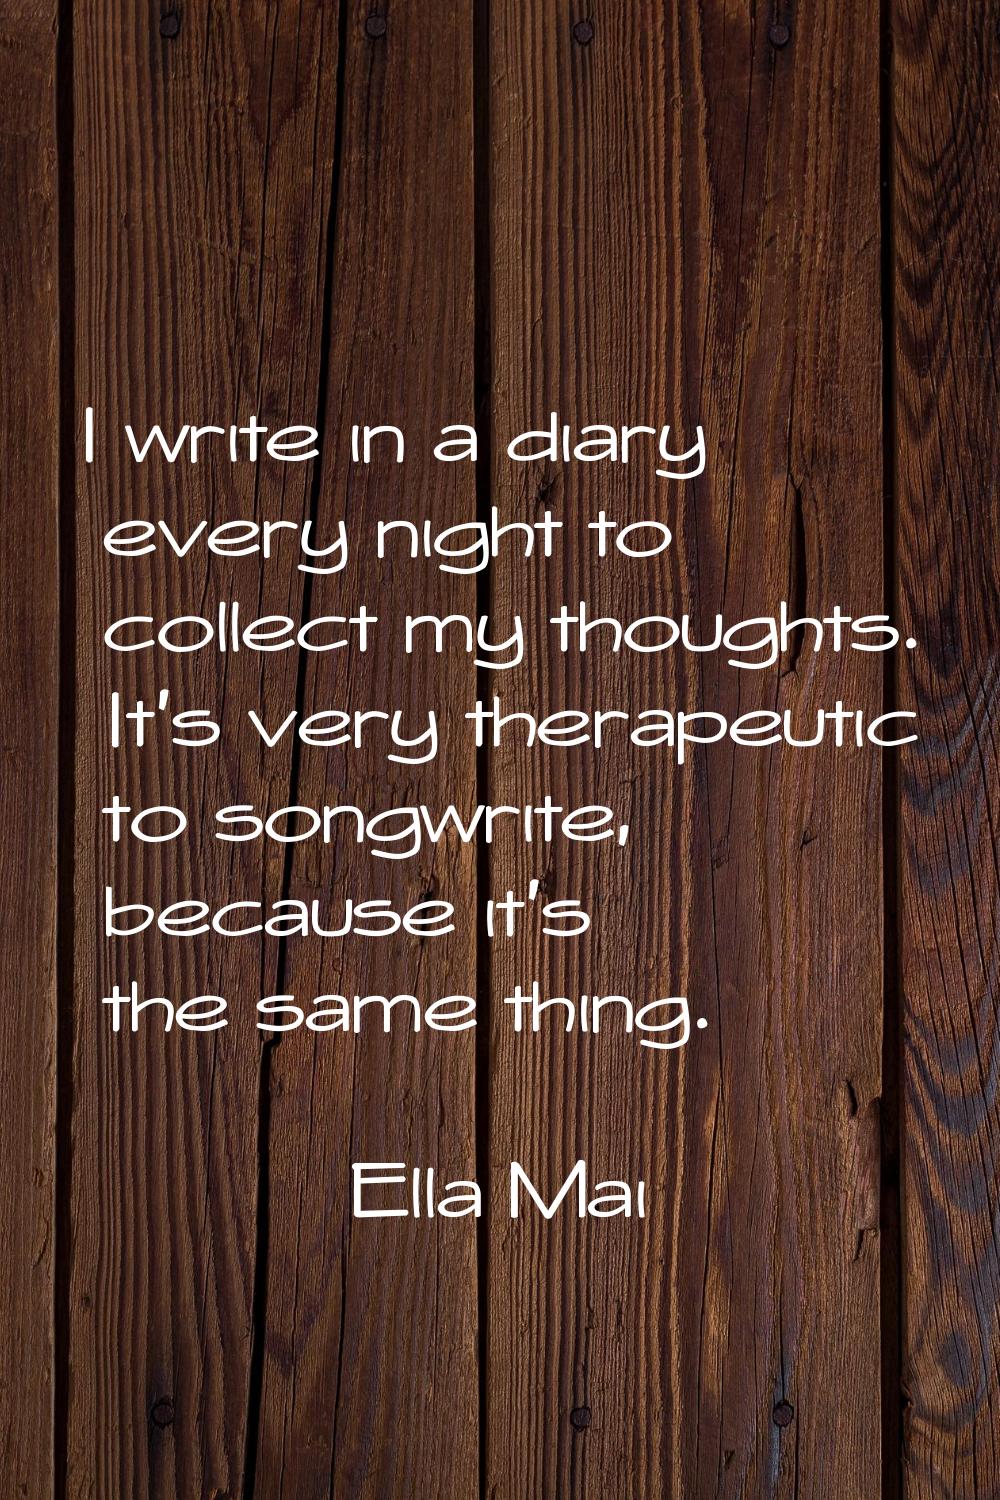 I write in a diary every night to collect my thoughts. It's very therapeutic to songwrite, because 